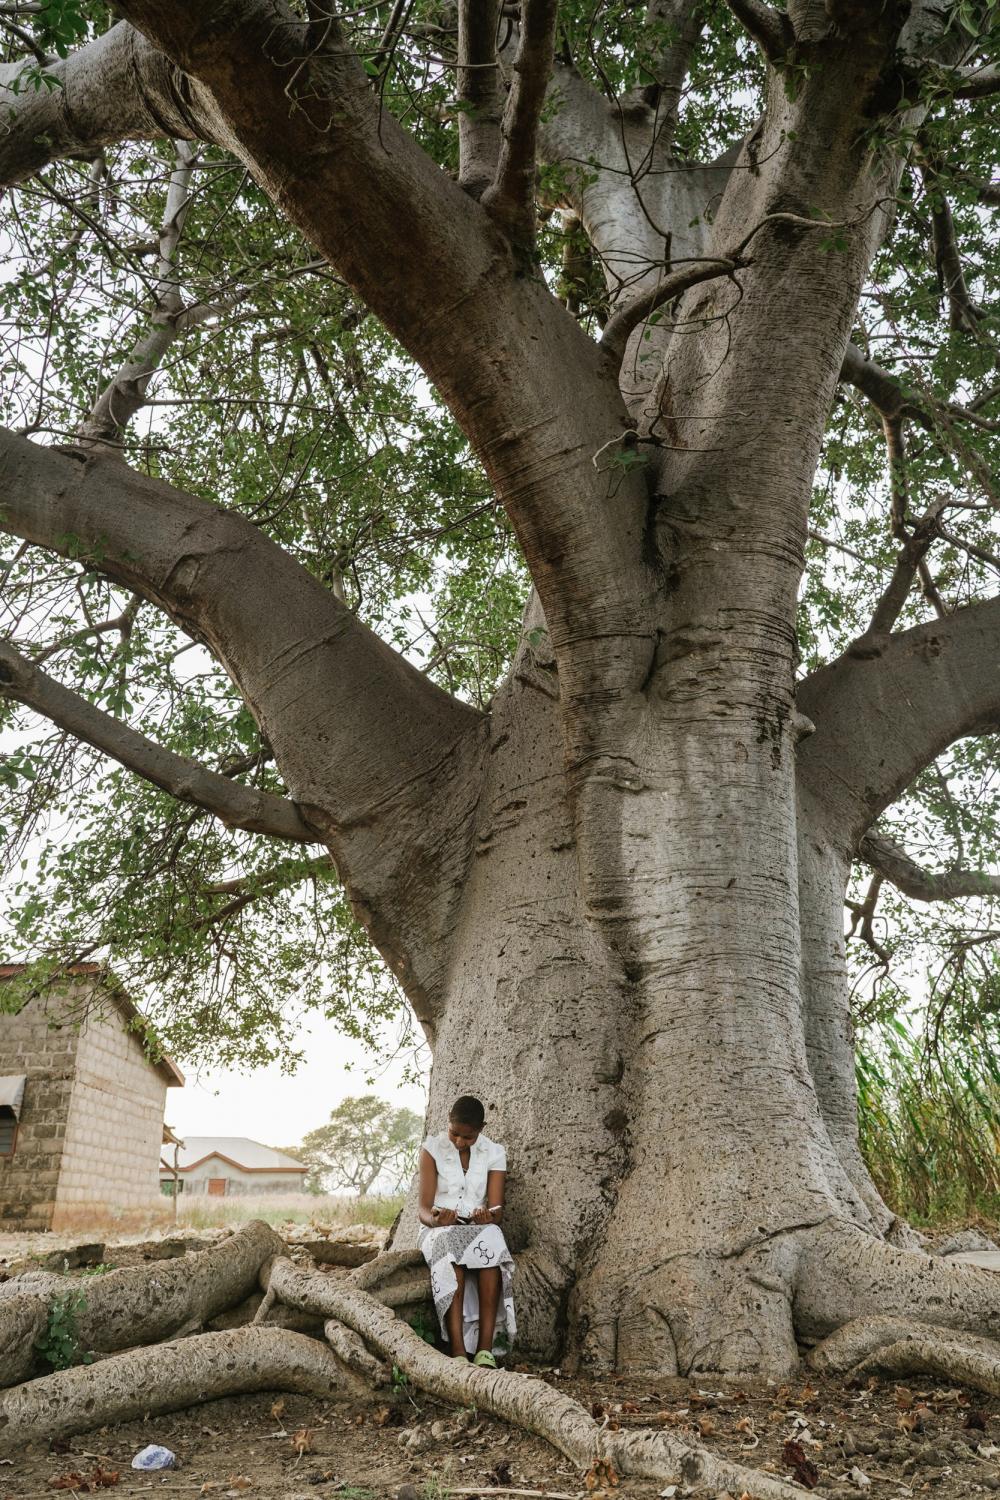 Tales Under the Baobab Tree - “Knowledge is like a Baobab tree, one...